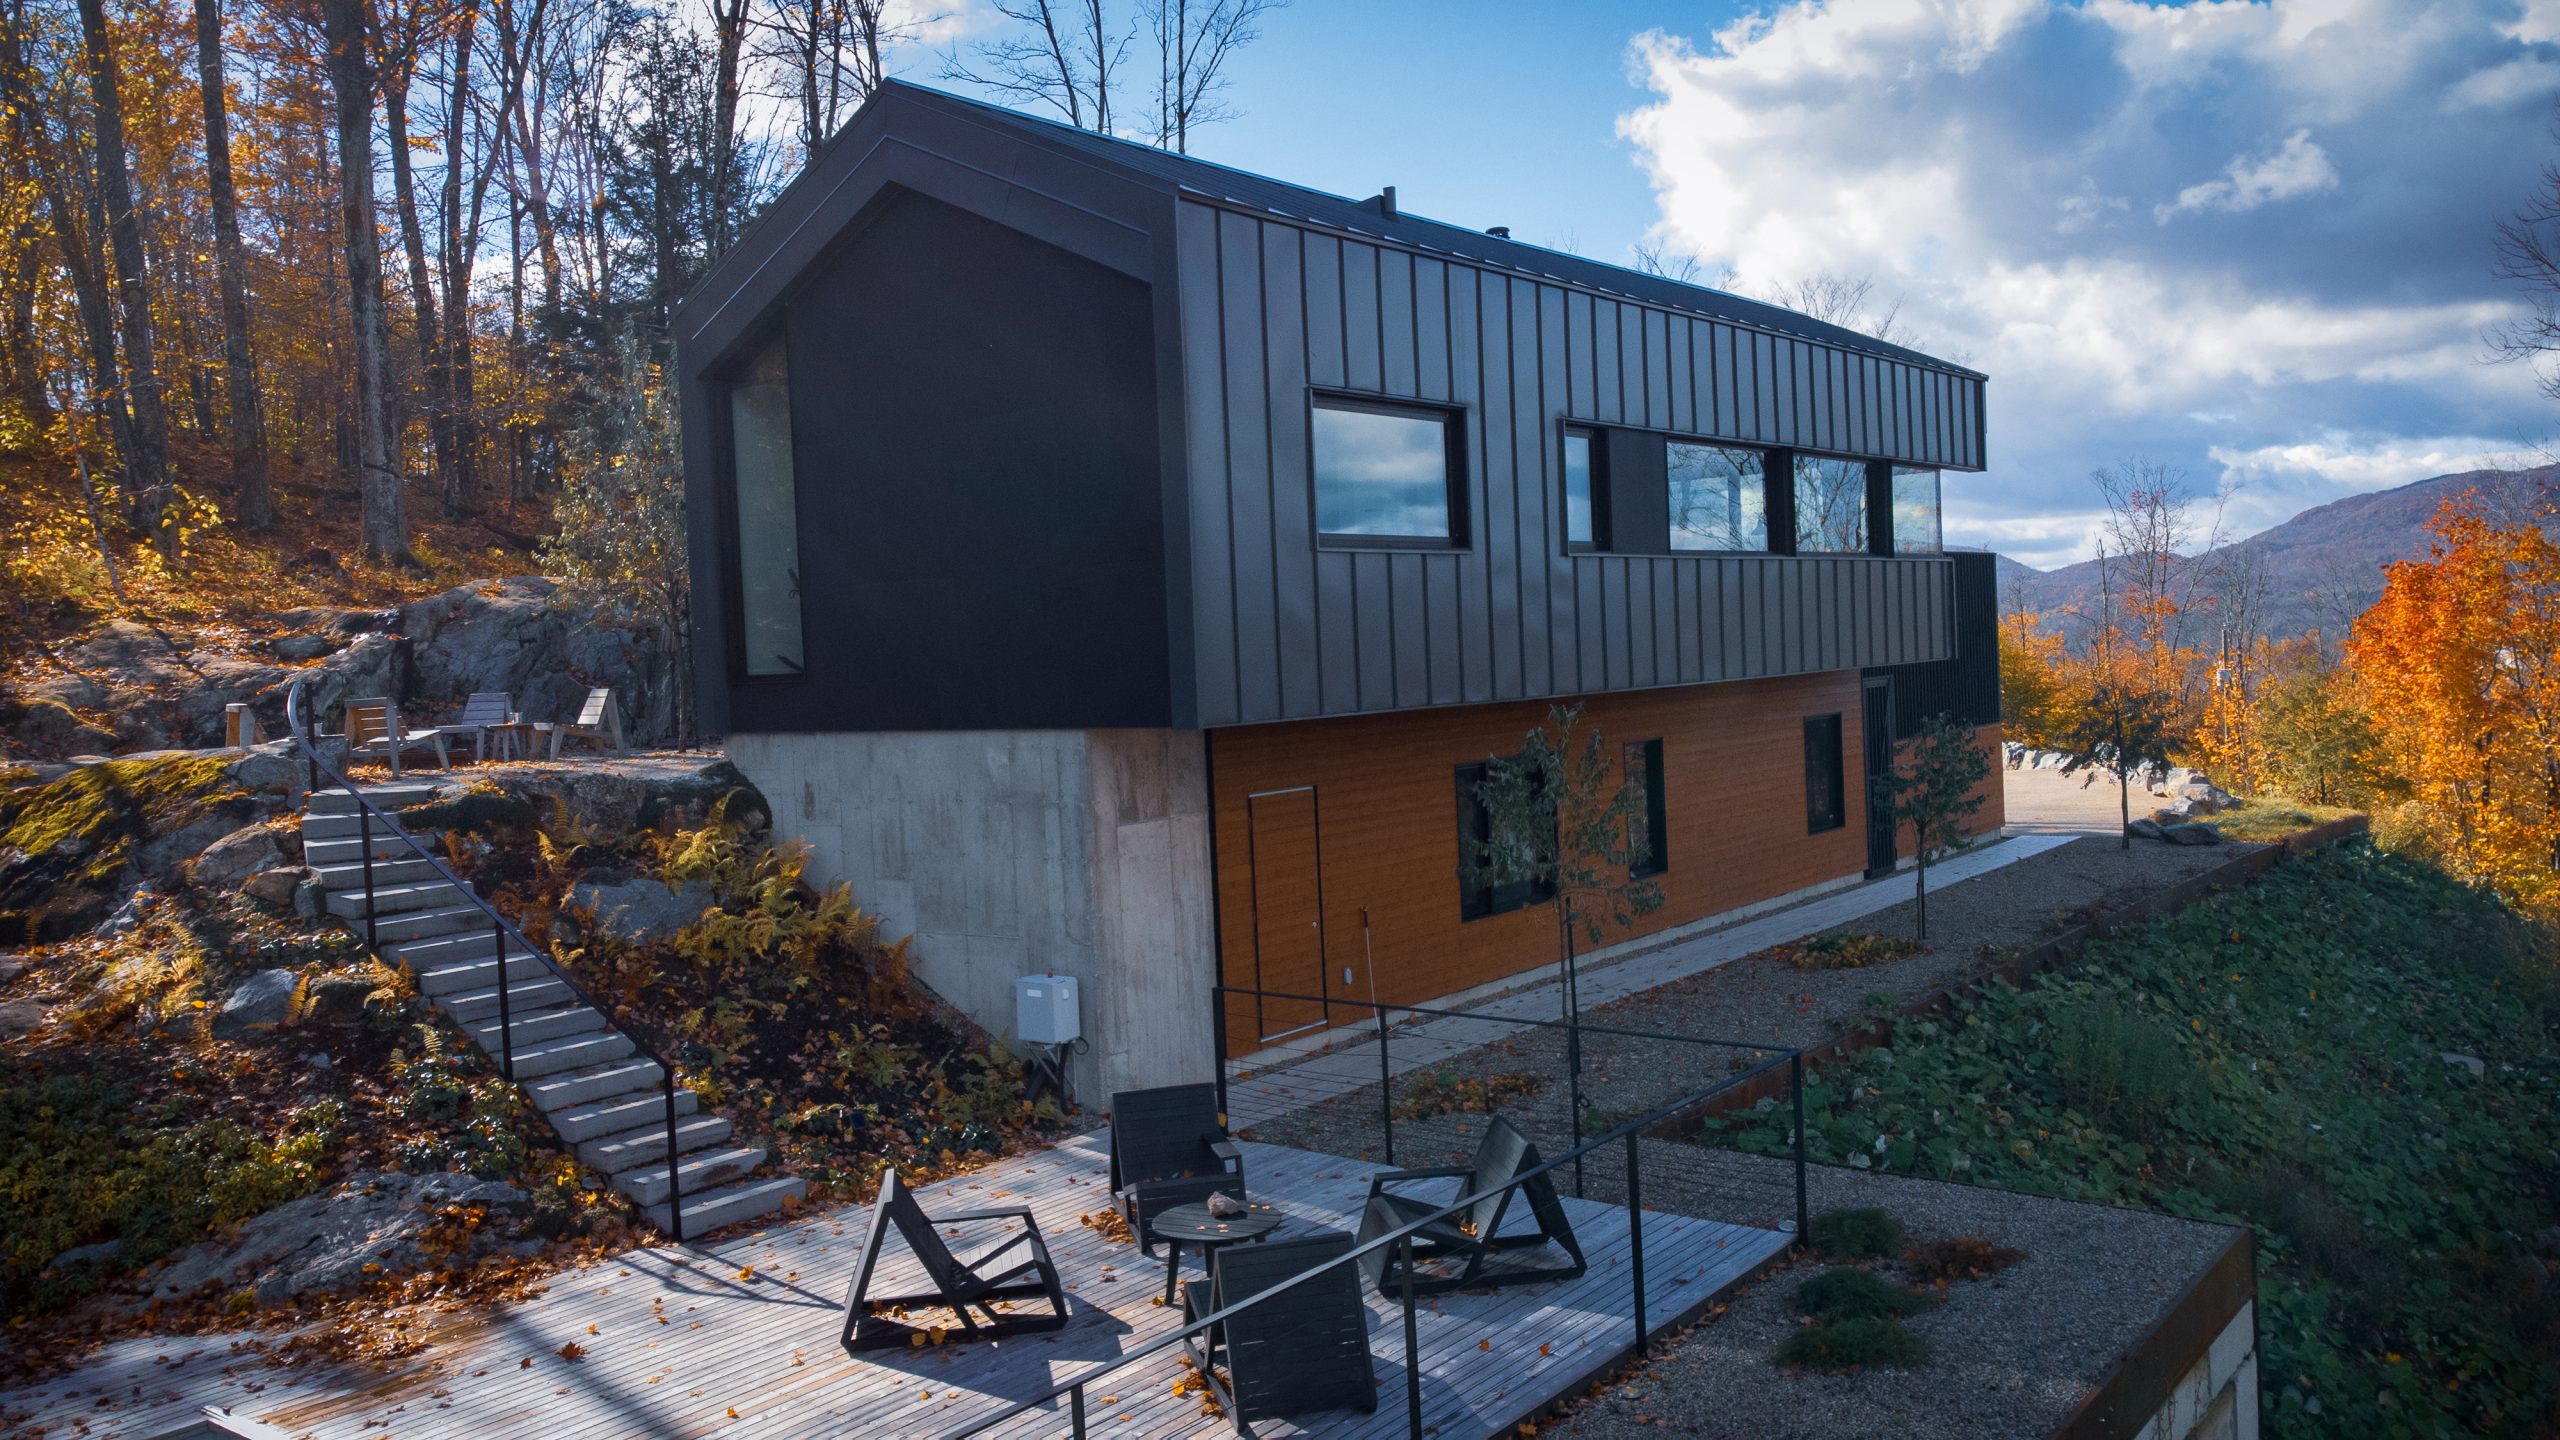 A modern architectural designed Airbnb vacation rental called Bolton-Est House is located in the Eastern Townships, Quebec, Canada